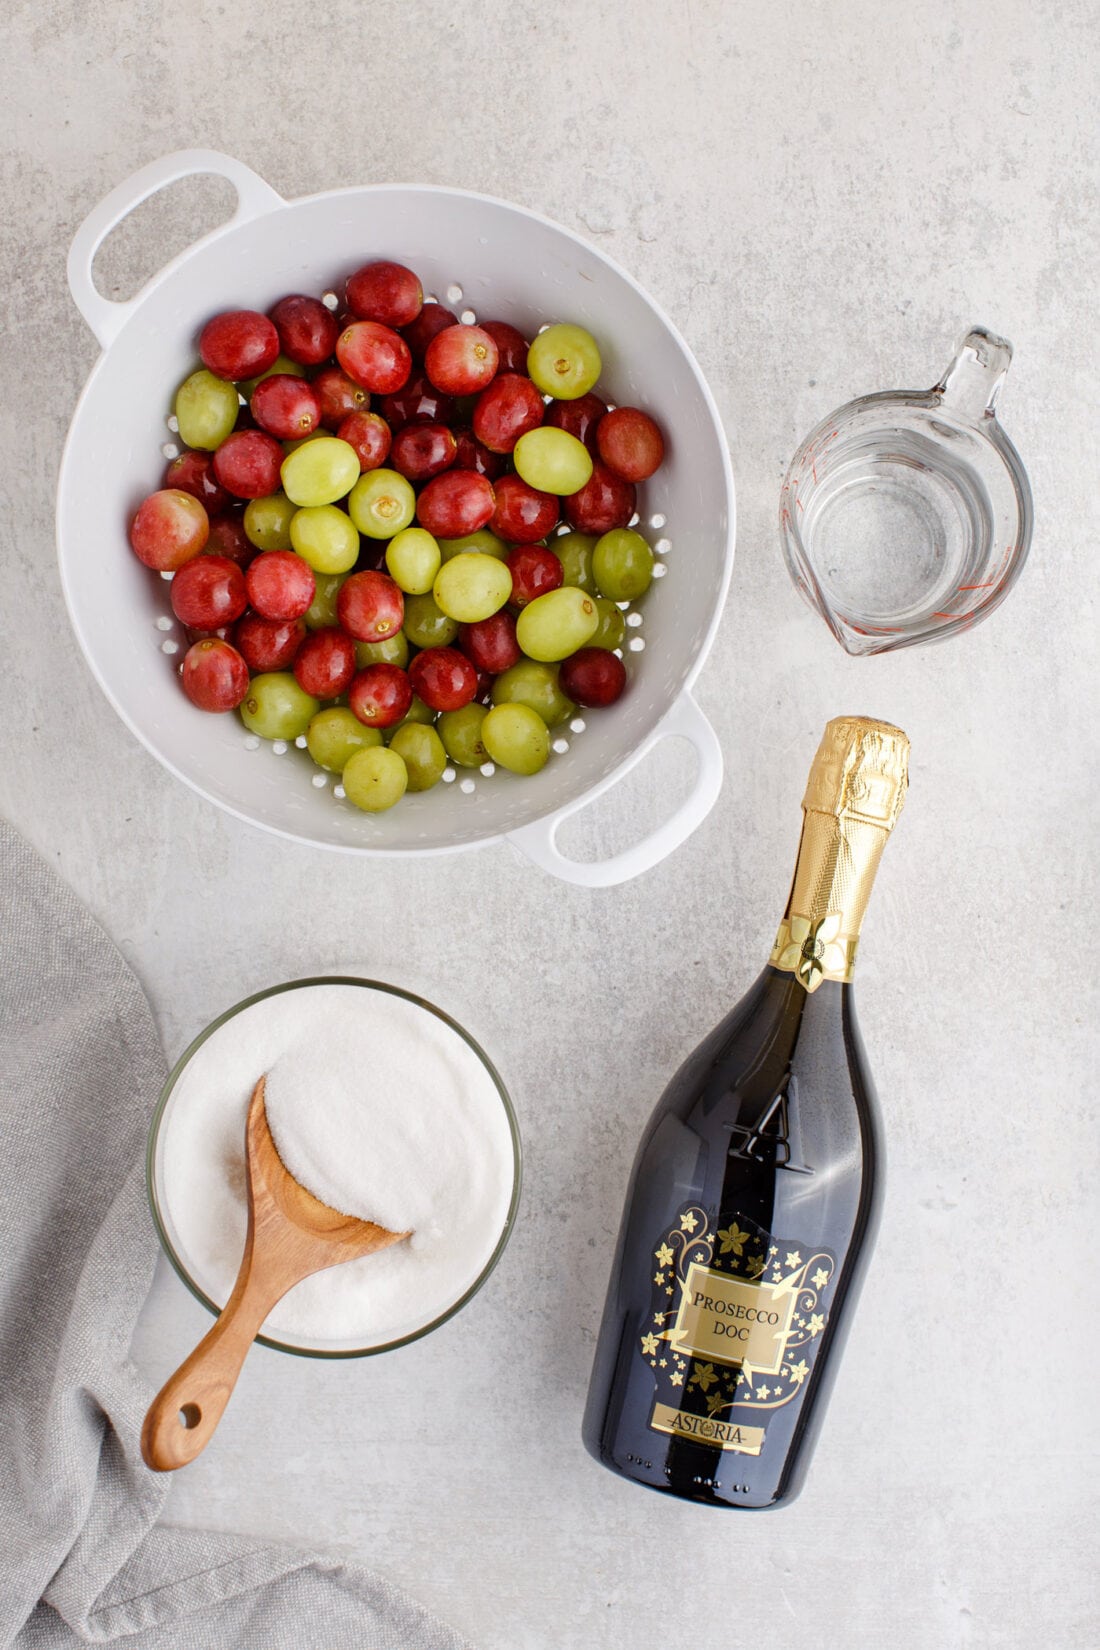 ingredients for Prosecco Vodka Grapes